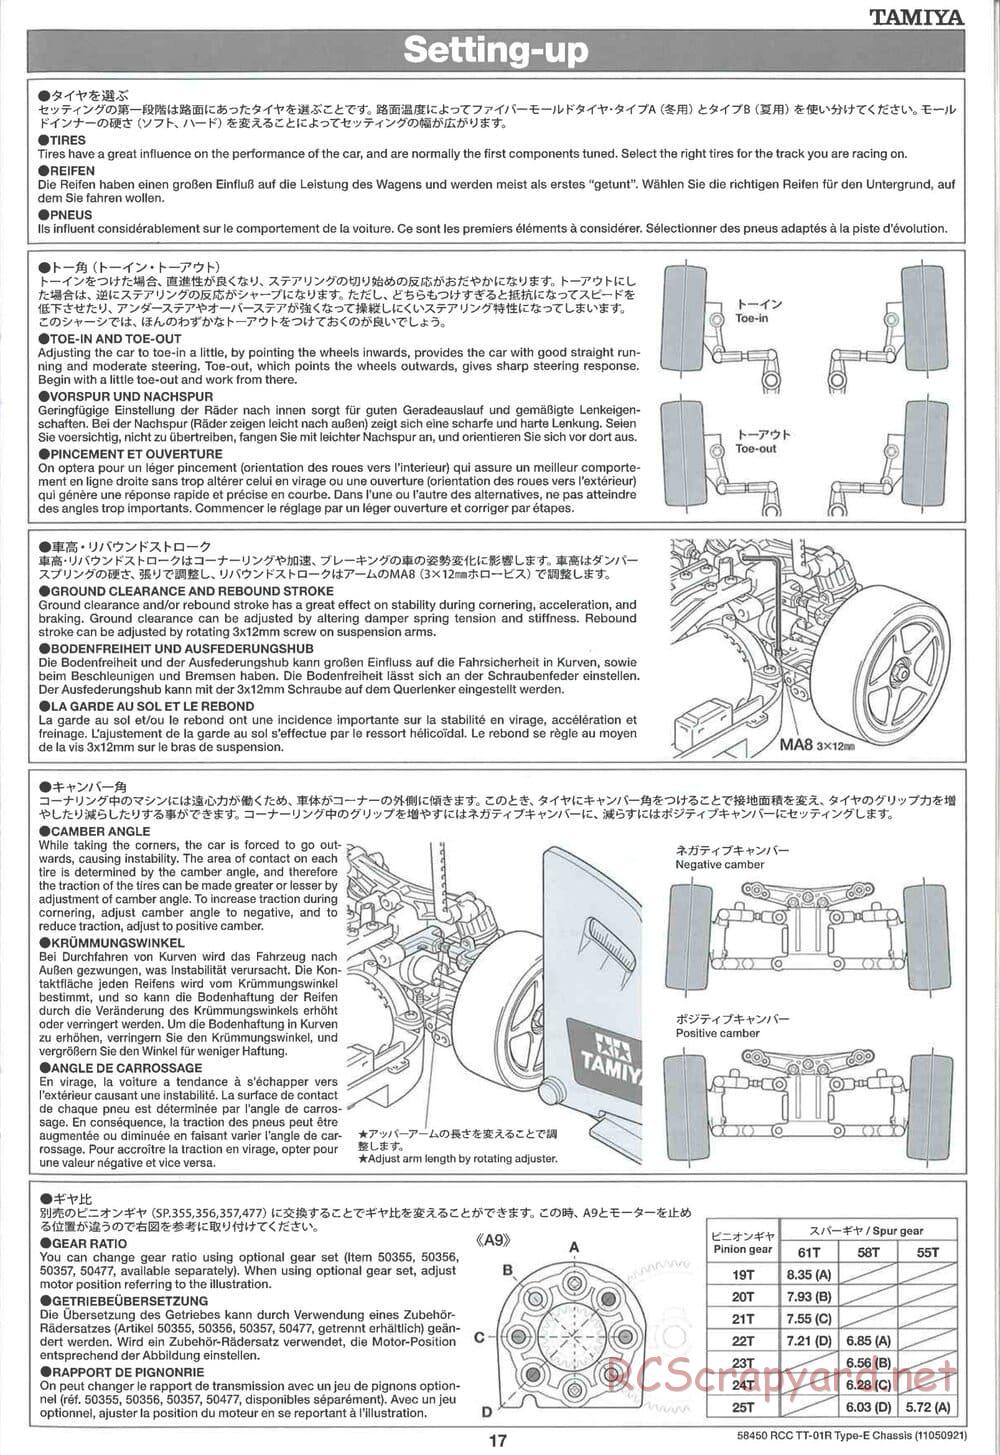 Tamiya - TT-01R Type-E Chassis - Manual - Page 17